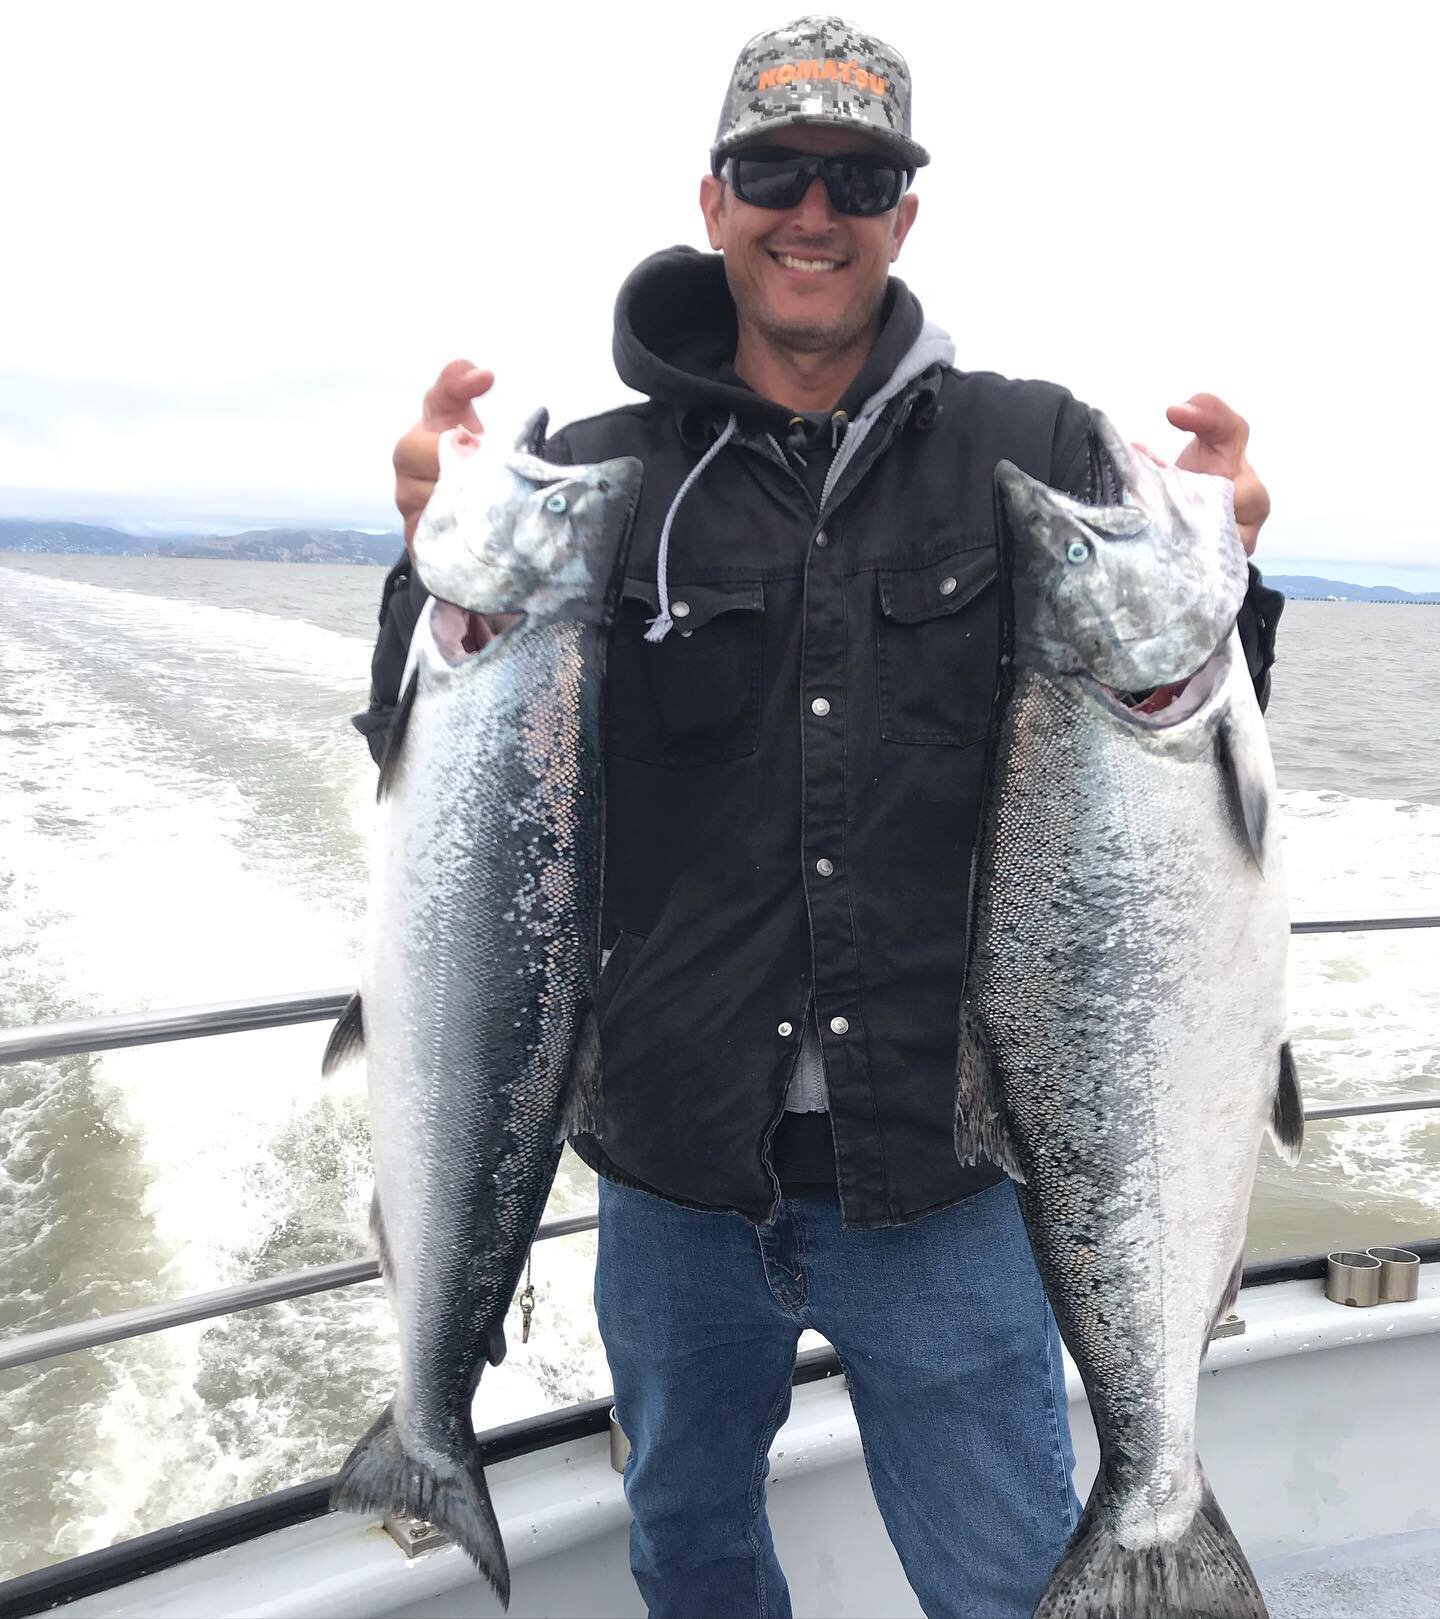 15 Limits by 10am! Good people and great fishing!! The fish are on the bite don&rsquo;t miss out on the action!! We have 2 spots open tomorrow! Book online at fishemeryville.com or visit our website at pacificpearlcharters.com! #fishemeryville #pacif